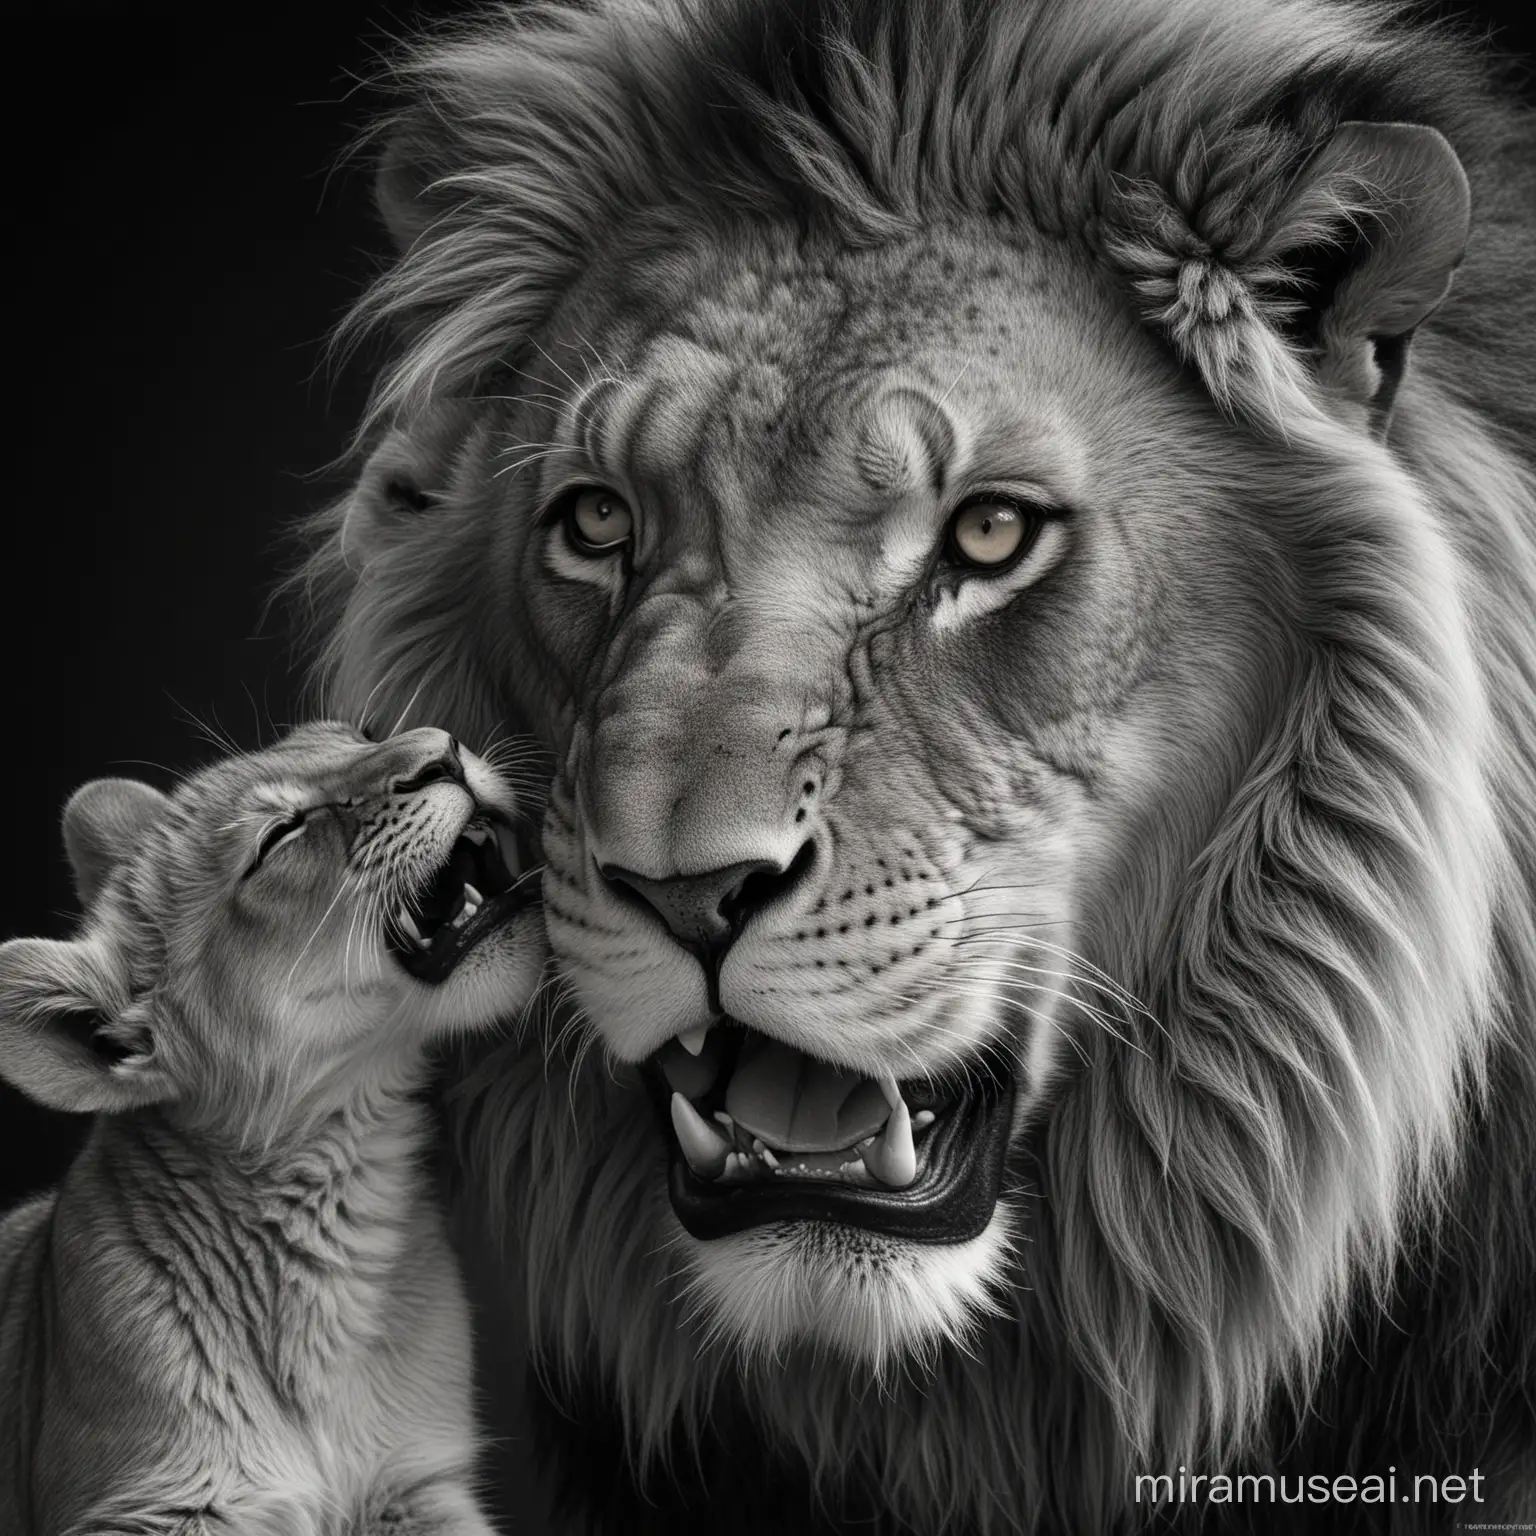 Adult male lion pulling a face at a cub, black background, black and white photo realistic style